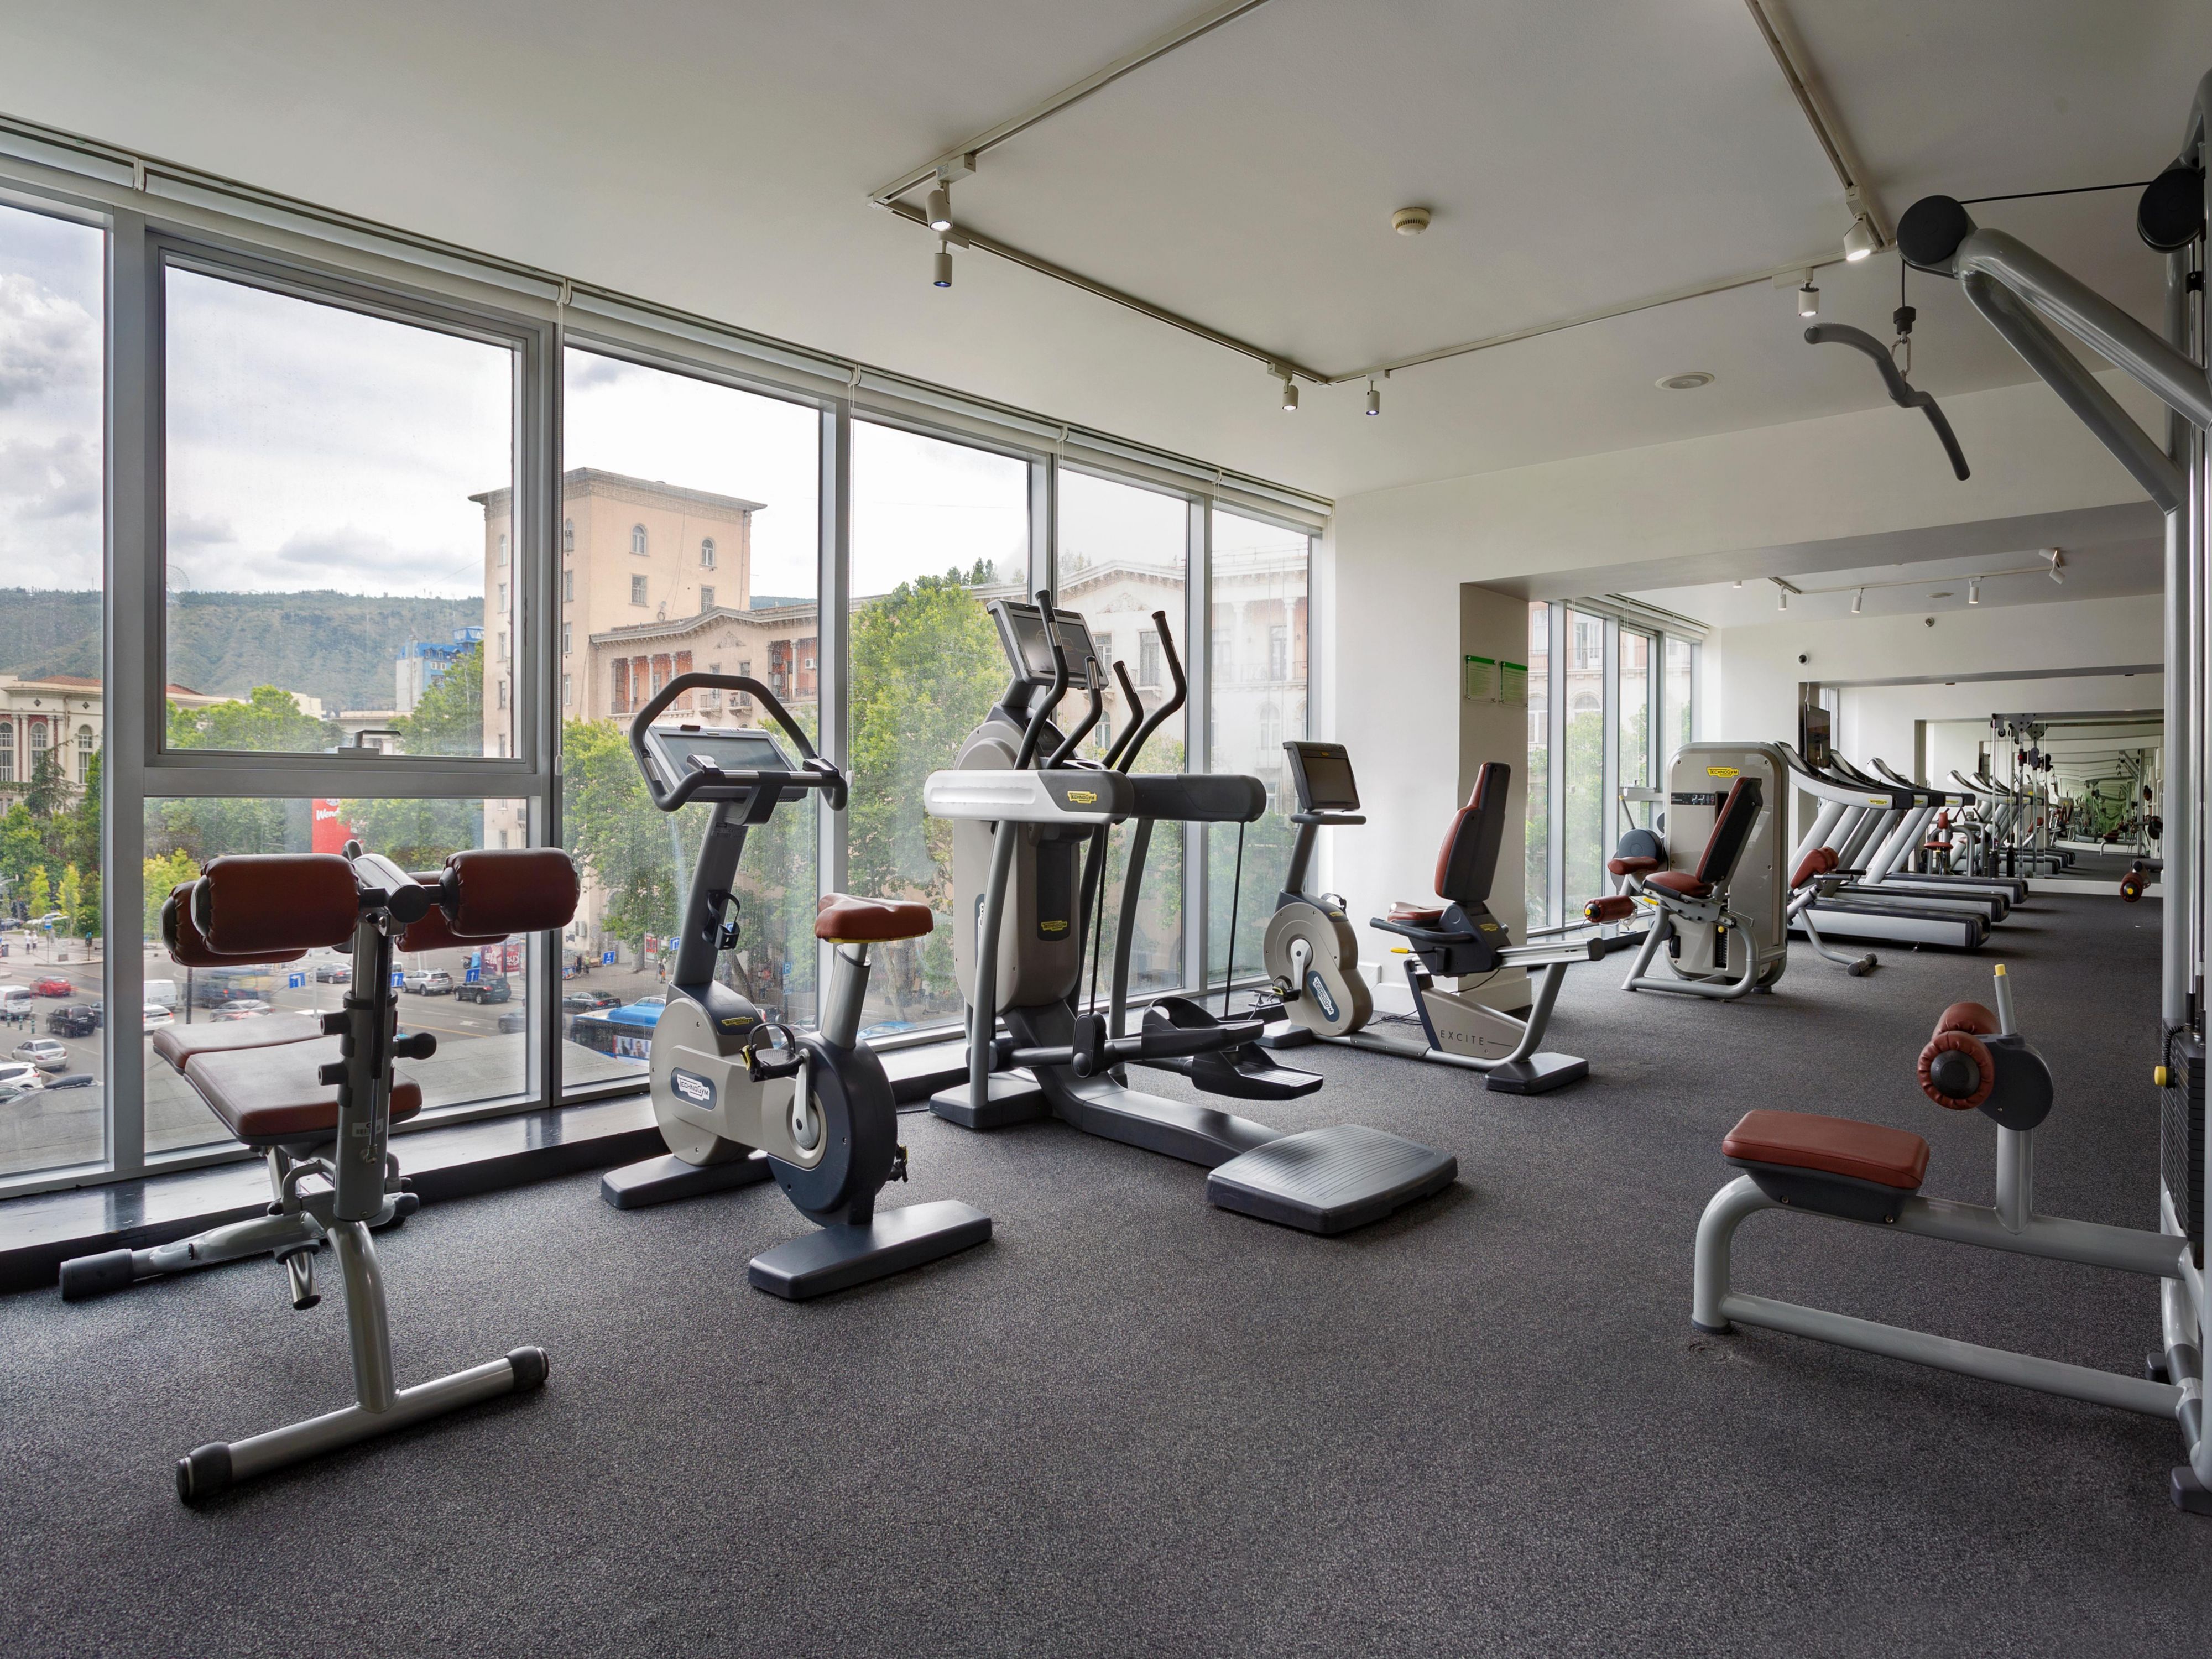 While enjoying your stay at the Holiday Inn Tbilisi, you have the opportunity to make the most of our well-equipped gym. Besides our prime location and impeccably maintained facilities, the Holiday Inn Tbilisi gym features state-of-the-art Technogym equipment.